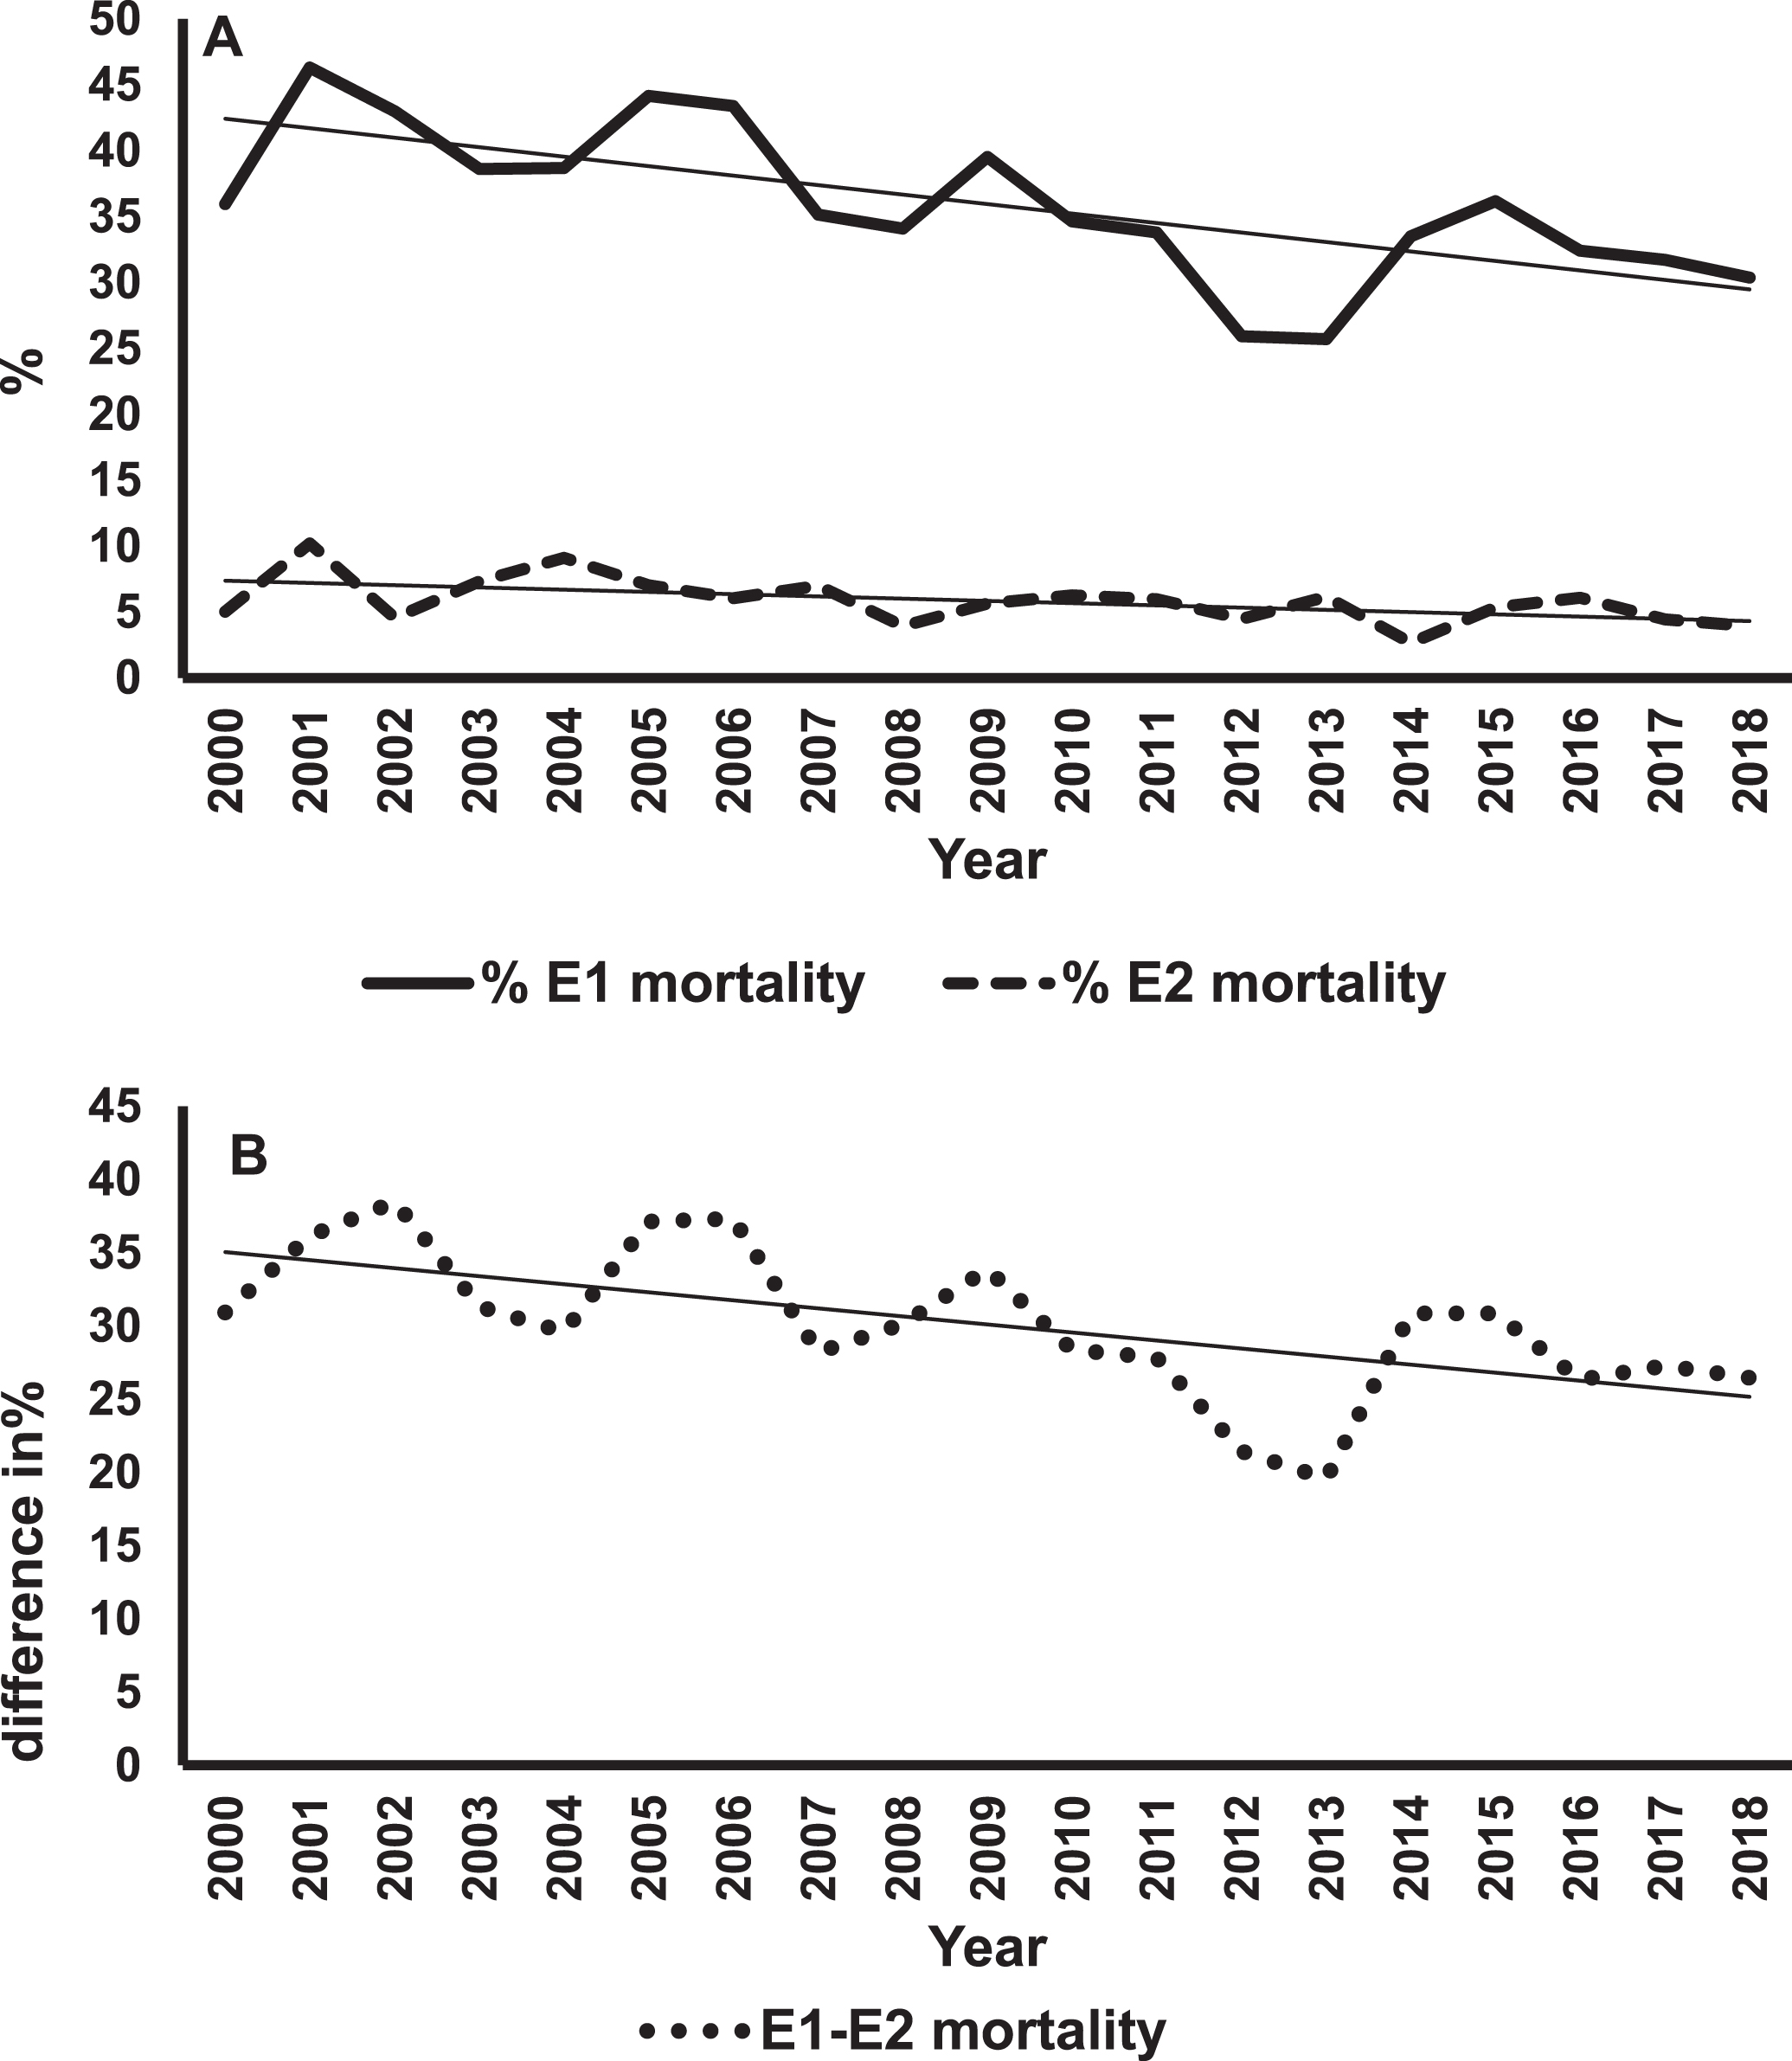 Mortality trends of E1 and E2 infants. Panel A shows the percent mortality for E1 (solid line) and E2 (dashed line) infants over 19 years with the best fitting regression lines superimposed on the data for each group of infants. The slope for E1 = –0.72% /year, p < 0.001. The slope for E2 = –0.17% /year, p = 0.02. Panel B is a plot of the difference in percent mortality (E1 minus E2) for each year, and the best fitting regression line. The slope is = –0.55% /year, p < 0.006.